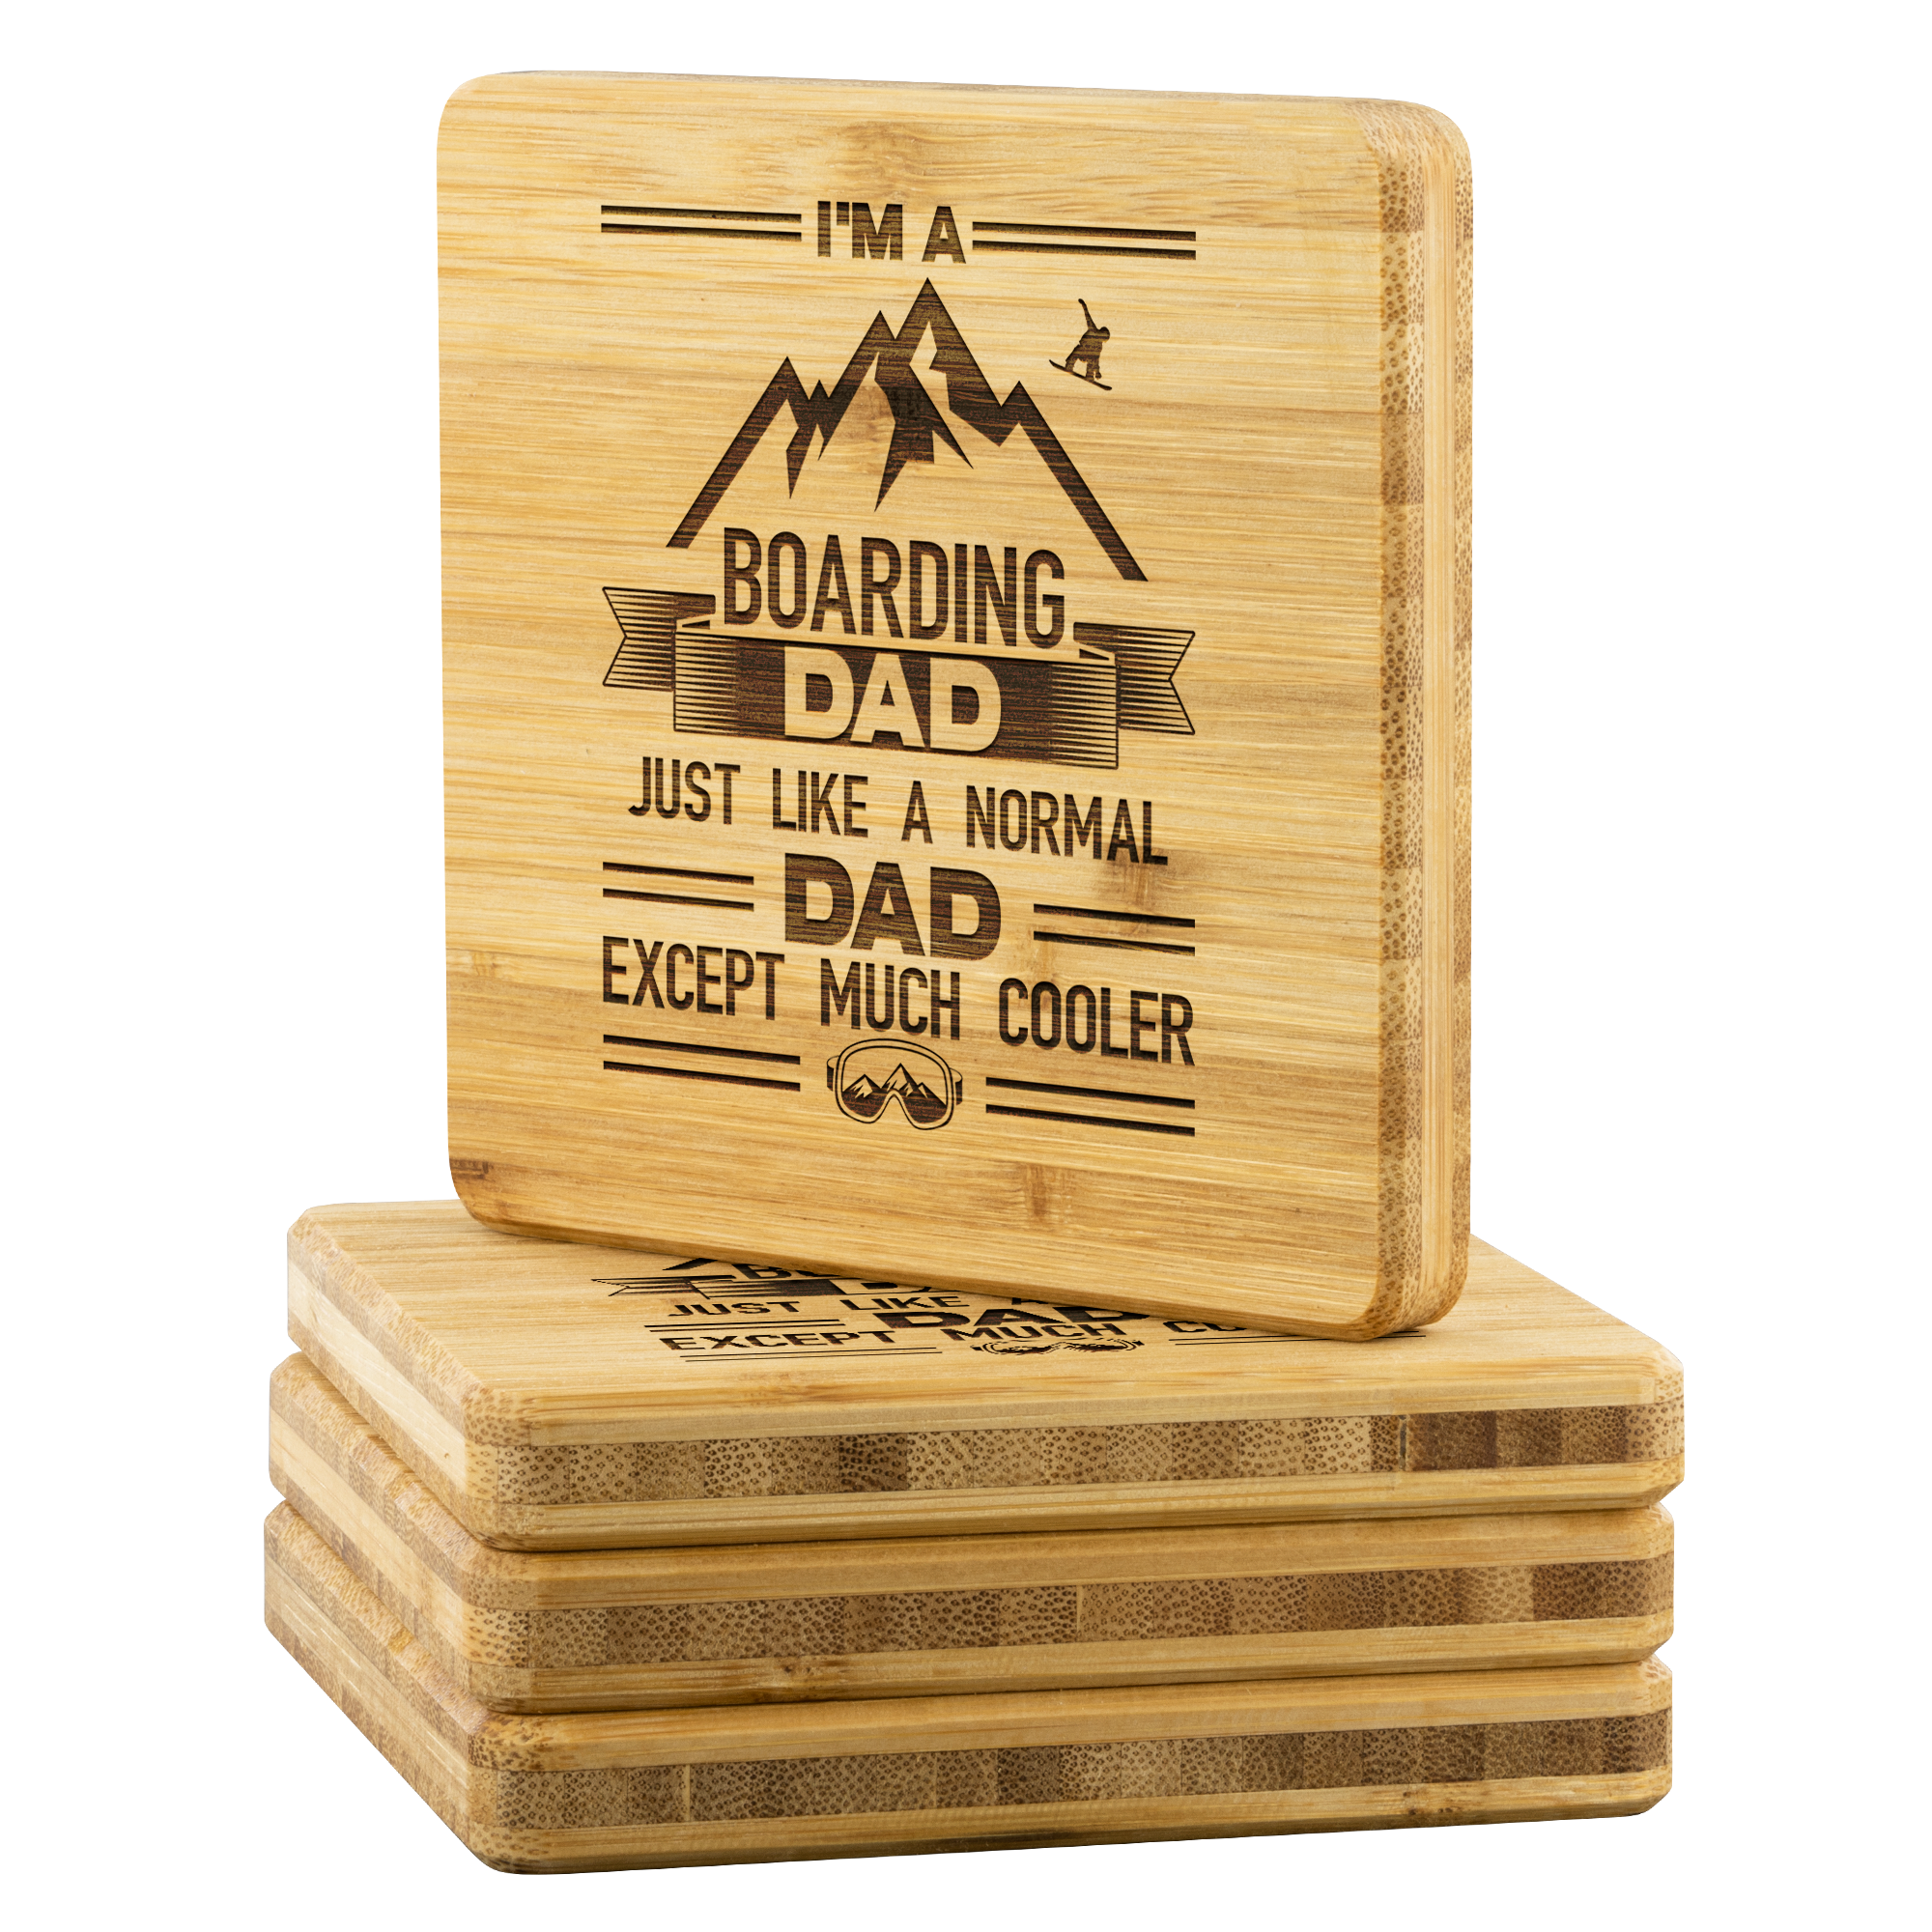 I'm A Boarding Dad Except Much Cooler Bamboo Coaster - Powderaddicts